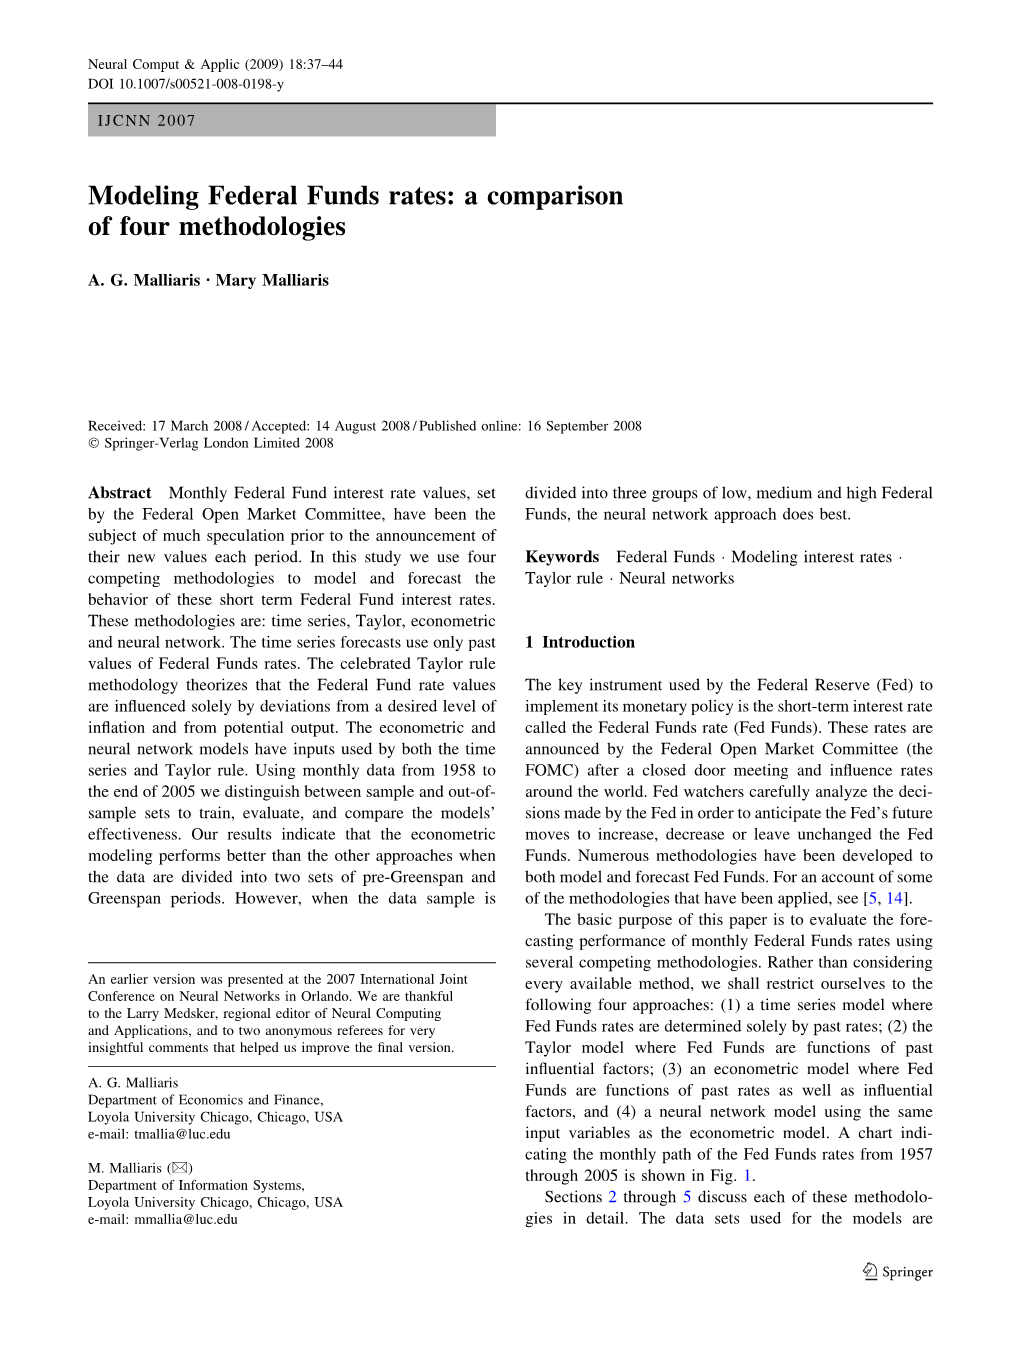 Modeling Federal Funds Rates: a Comparison of Four Methodologies